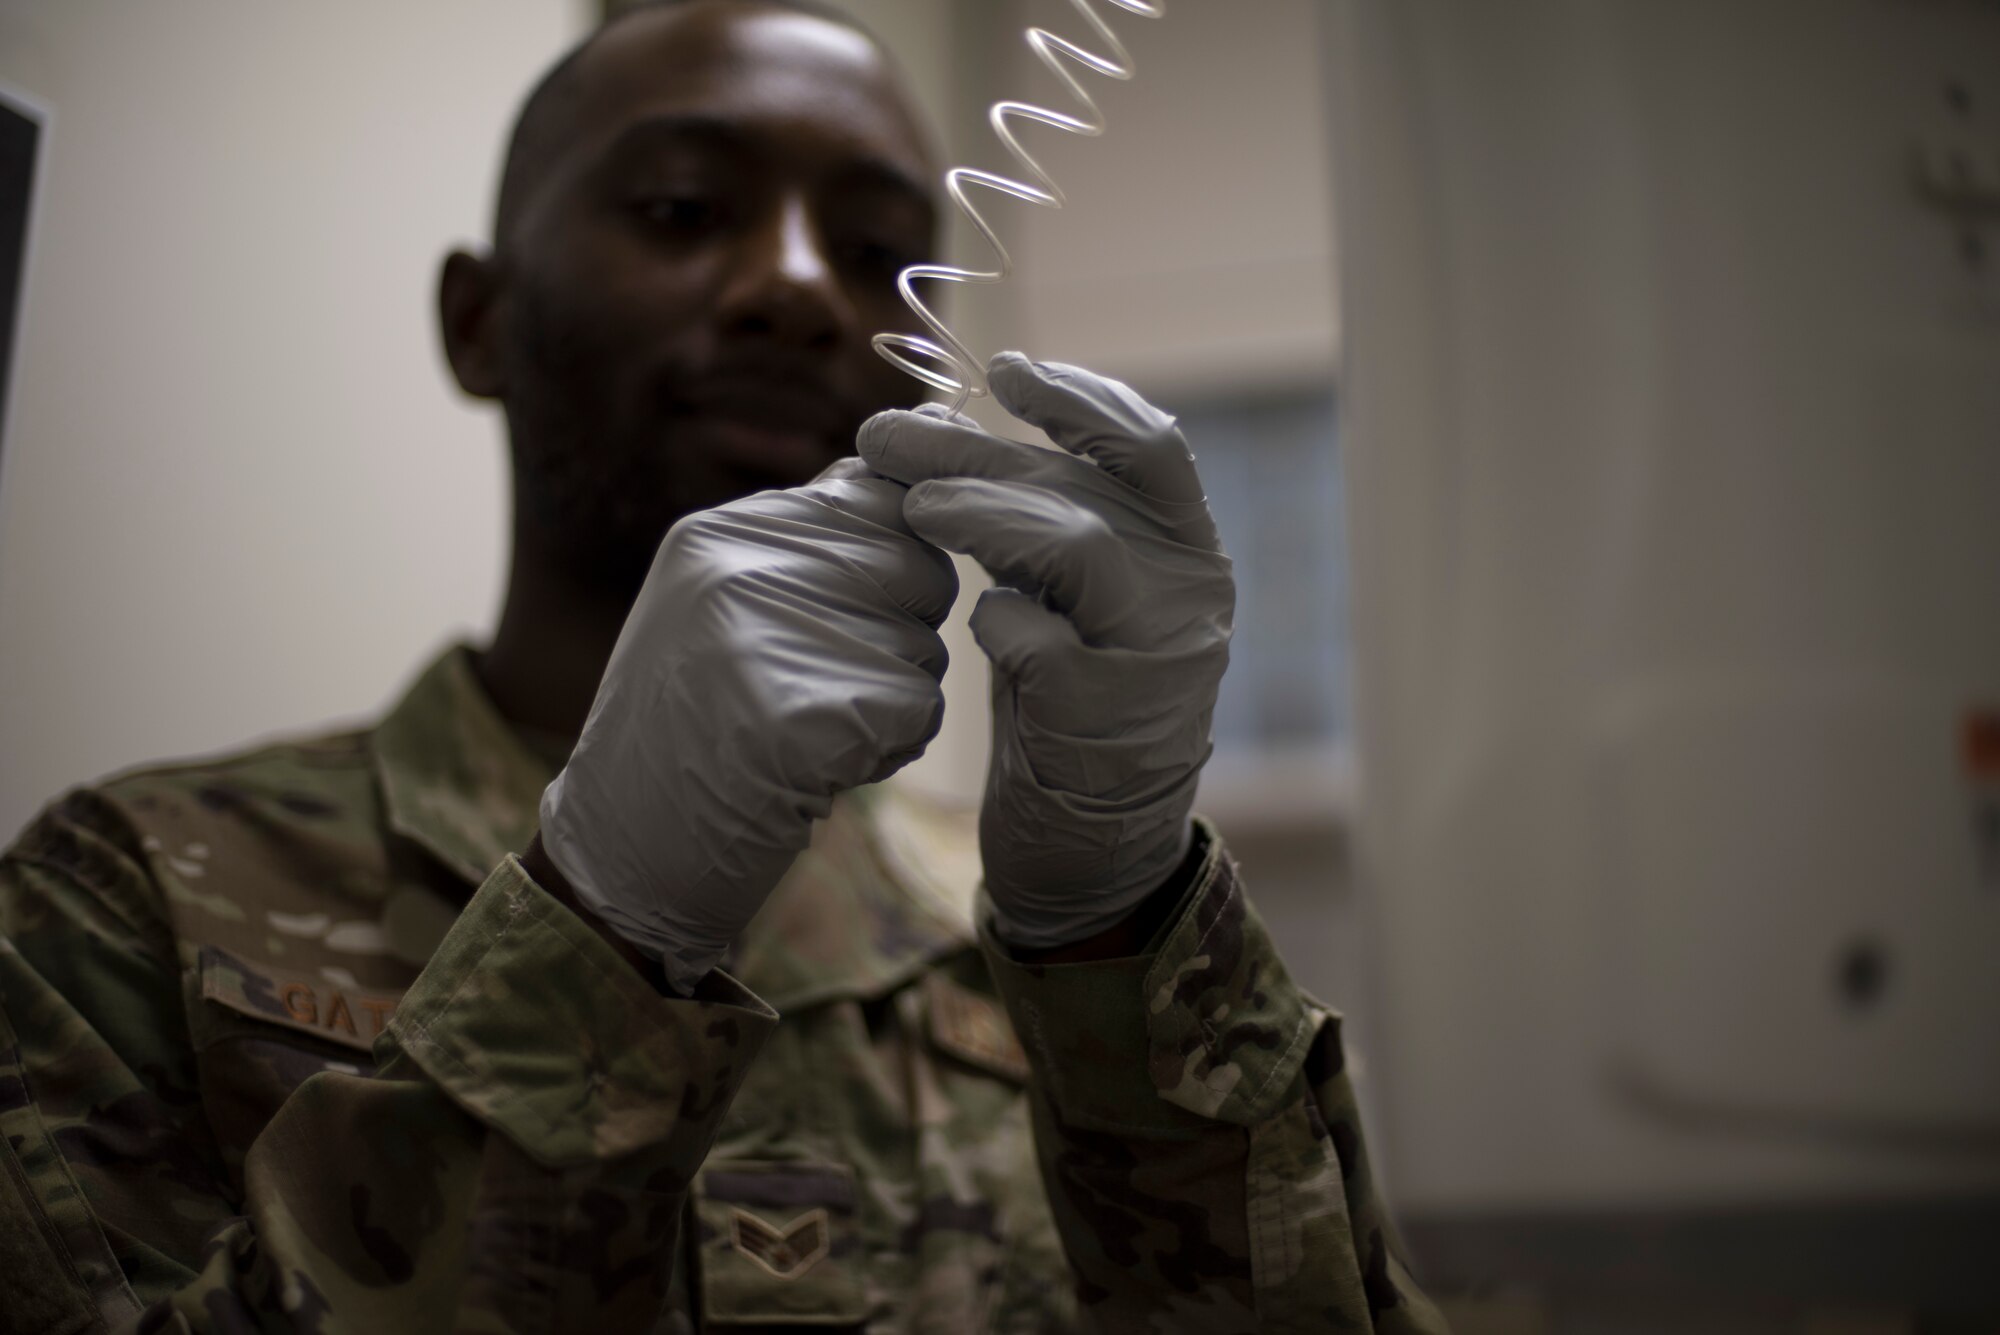 U.S. Air Force Senior Airman William Gathers III, a 35th Surgical Operations Squadron radiology technologist, prepares for a contrast enhance computed tomography examination at Misawa Air Base, Japan, April 10, 2019. Radiology technologists use special dye to find pathologies and the location of diseases within the body. The process enhances the contrast between lesions and the normal surrounding structures improving the clarity and visibility of abnormalities. (U.S. Air Force photo by Senior Airman Collette Brooks)